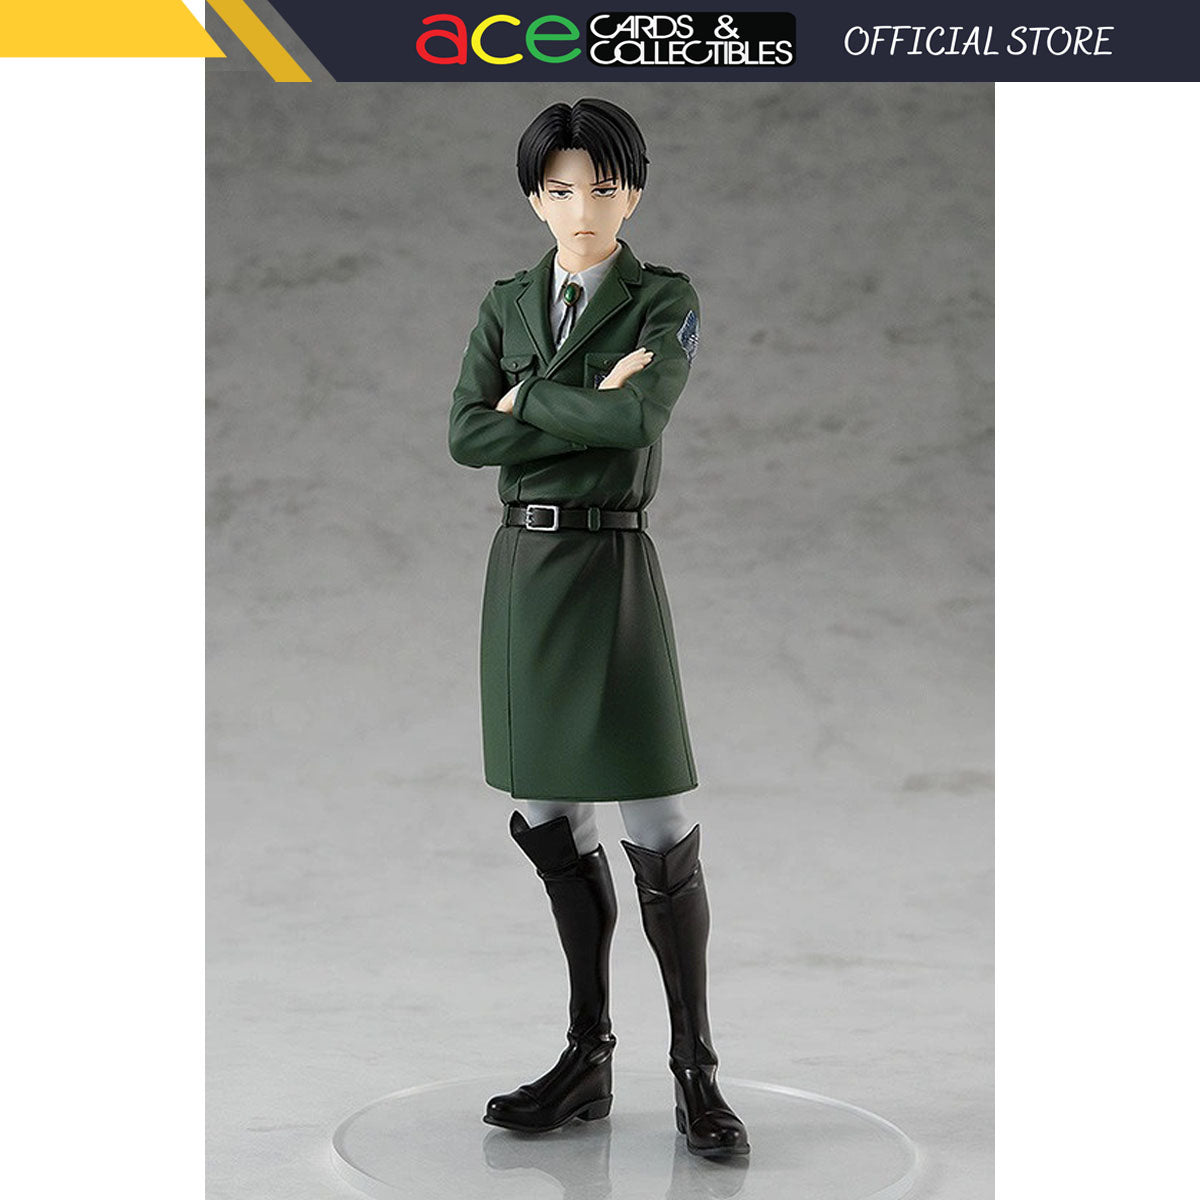 Attack on Titan Pop Up Parade "Levi"-Good Smile Company-Ace Cards & Collectibles